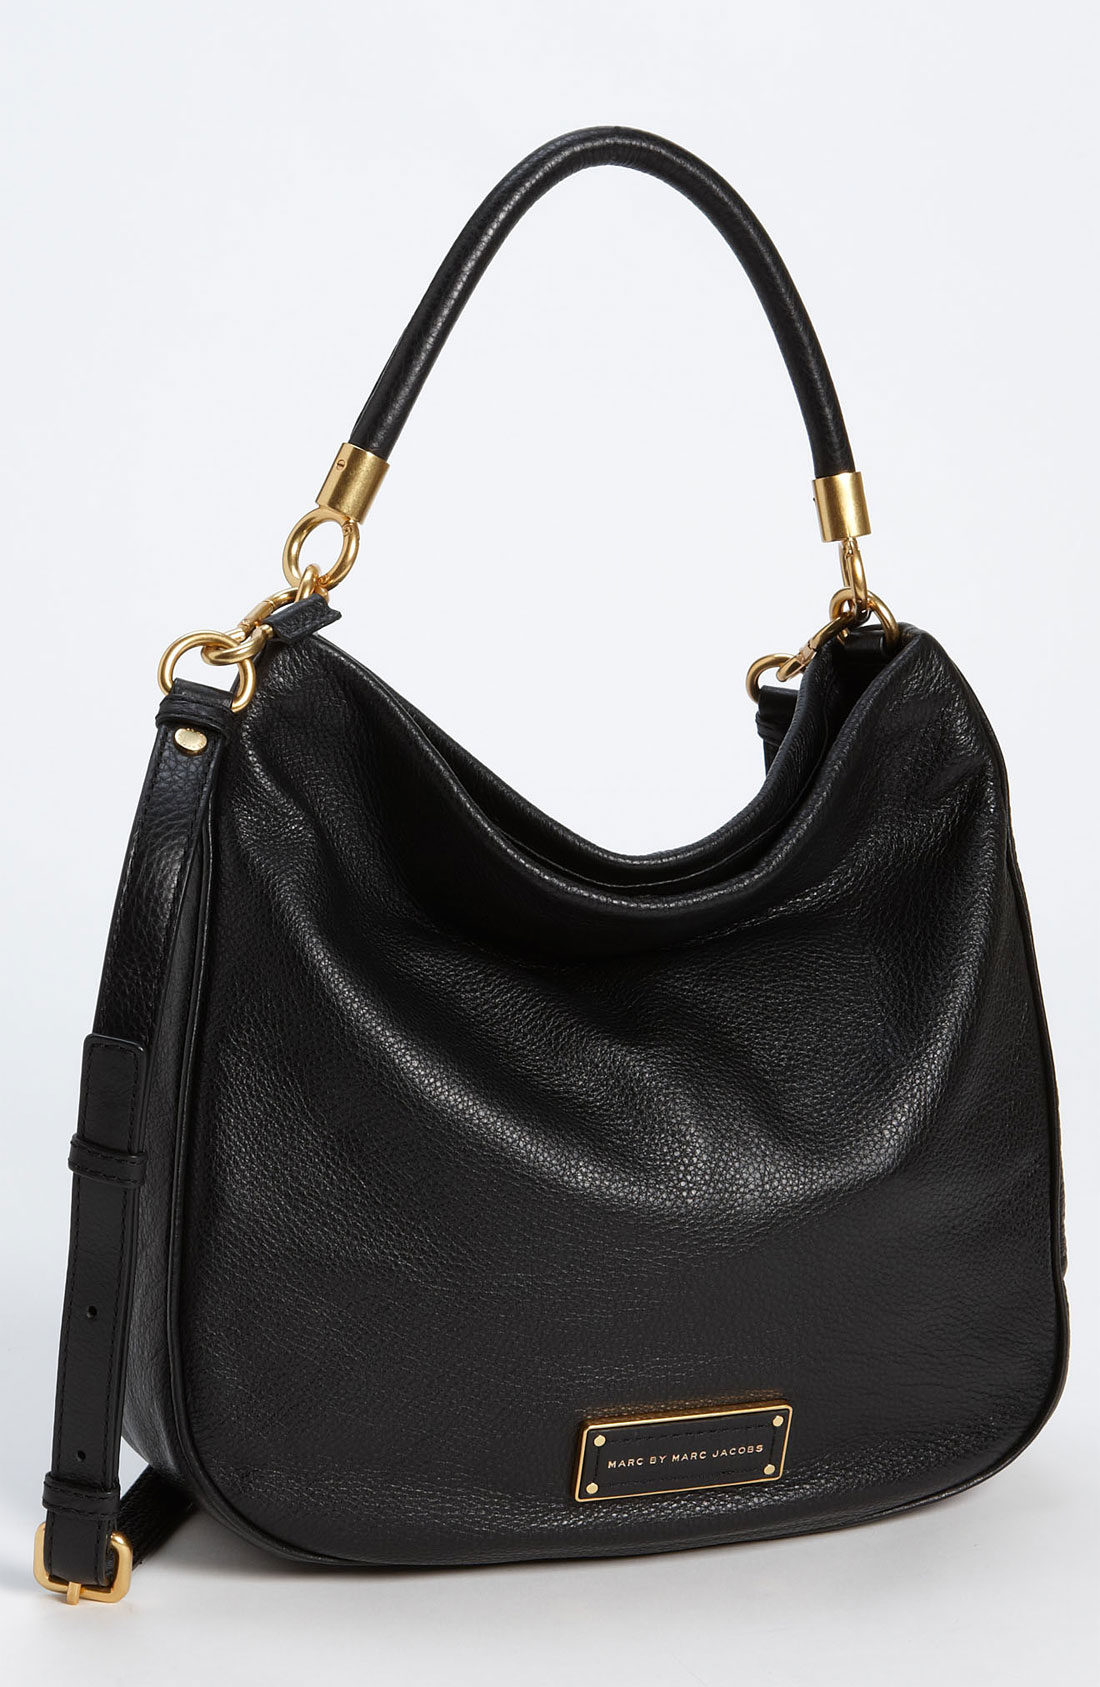 Lyst - Marc by marc jacobs Too Hot To Handle Leather Satchel in Black